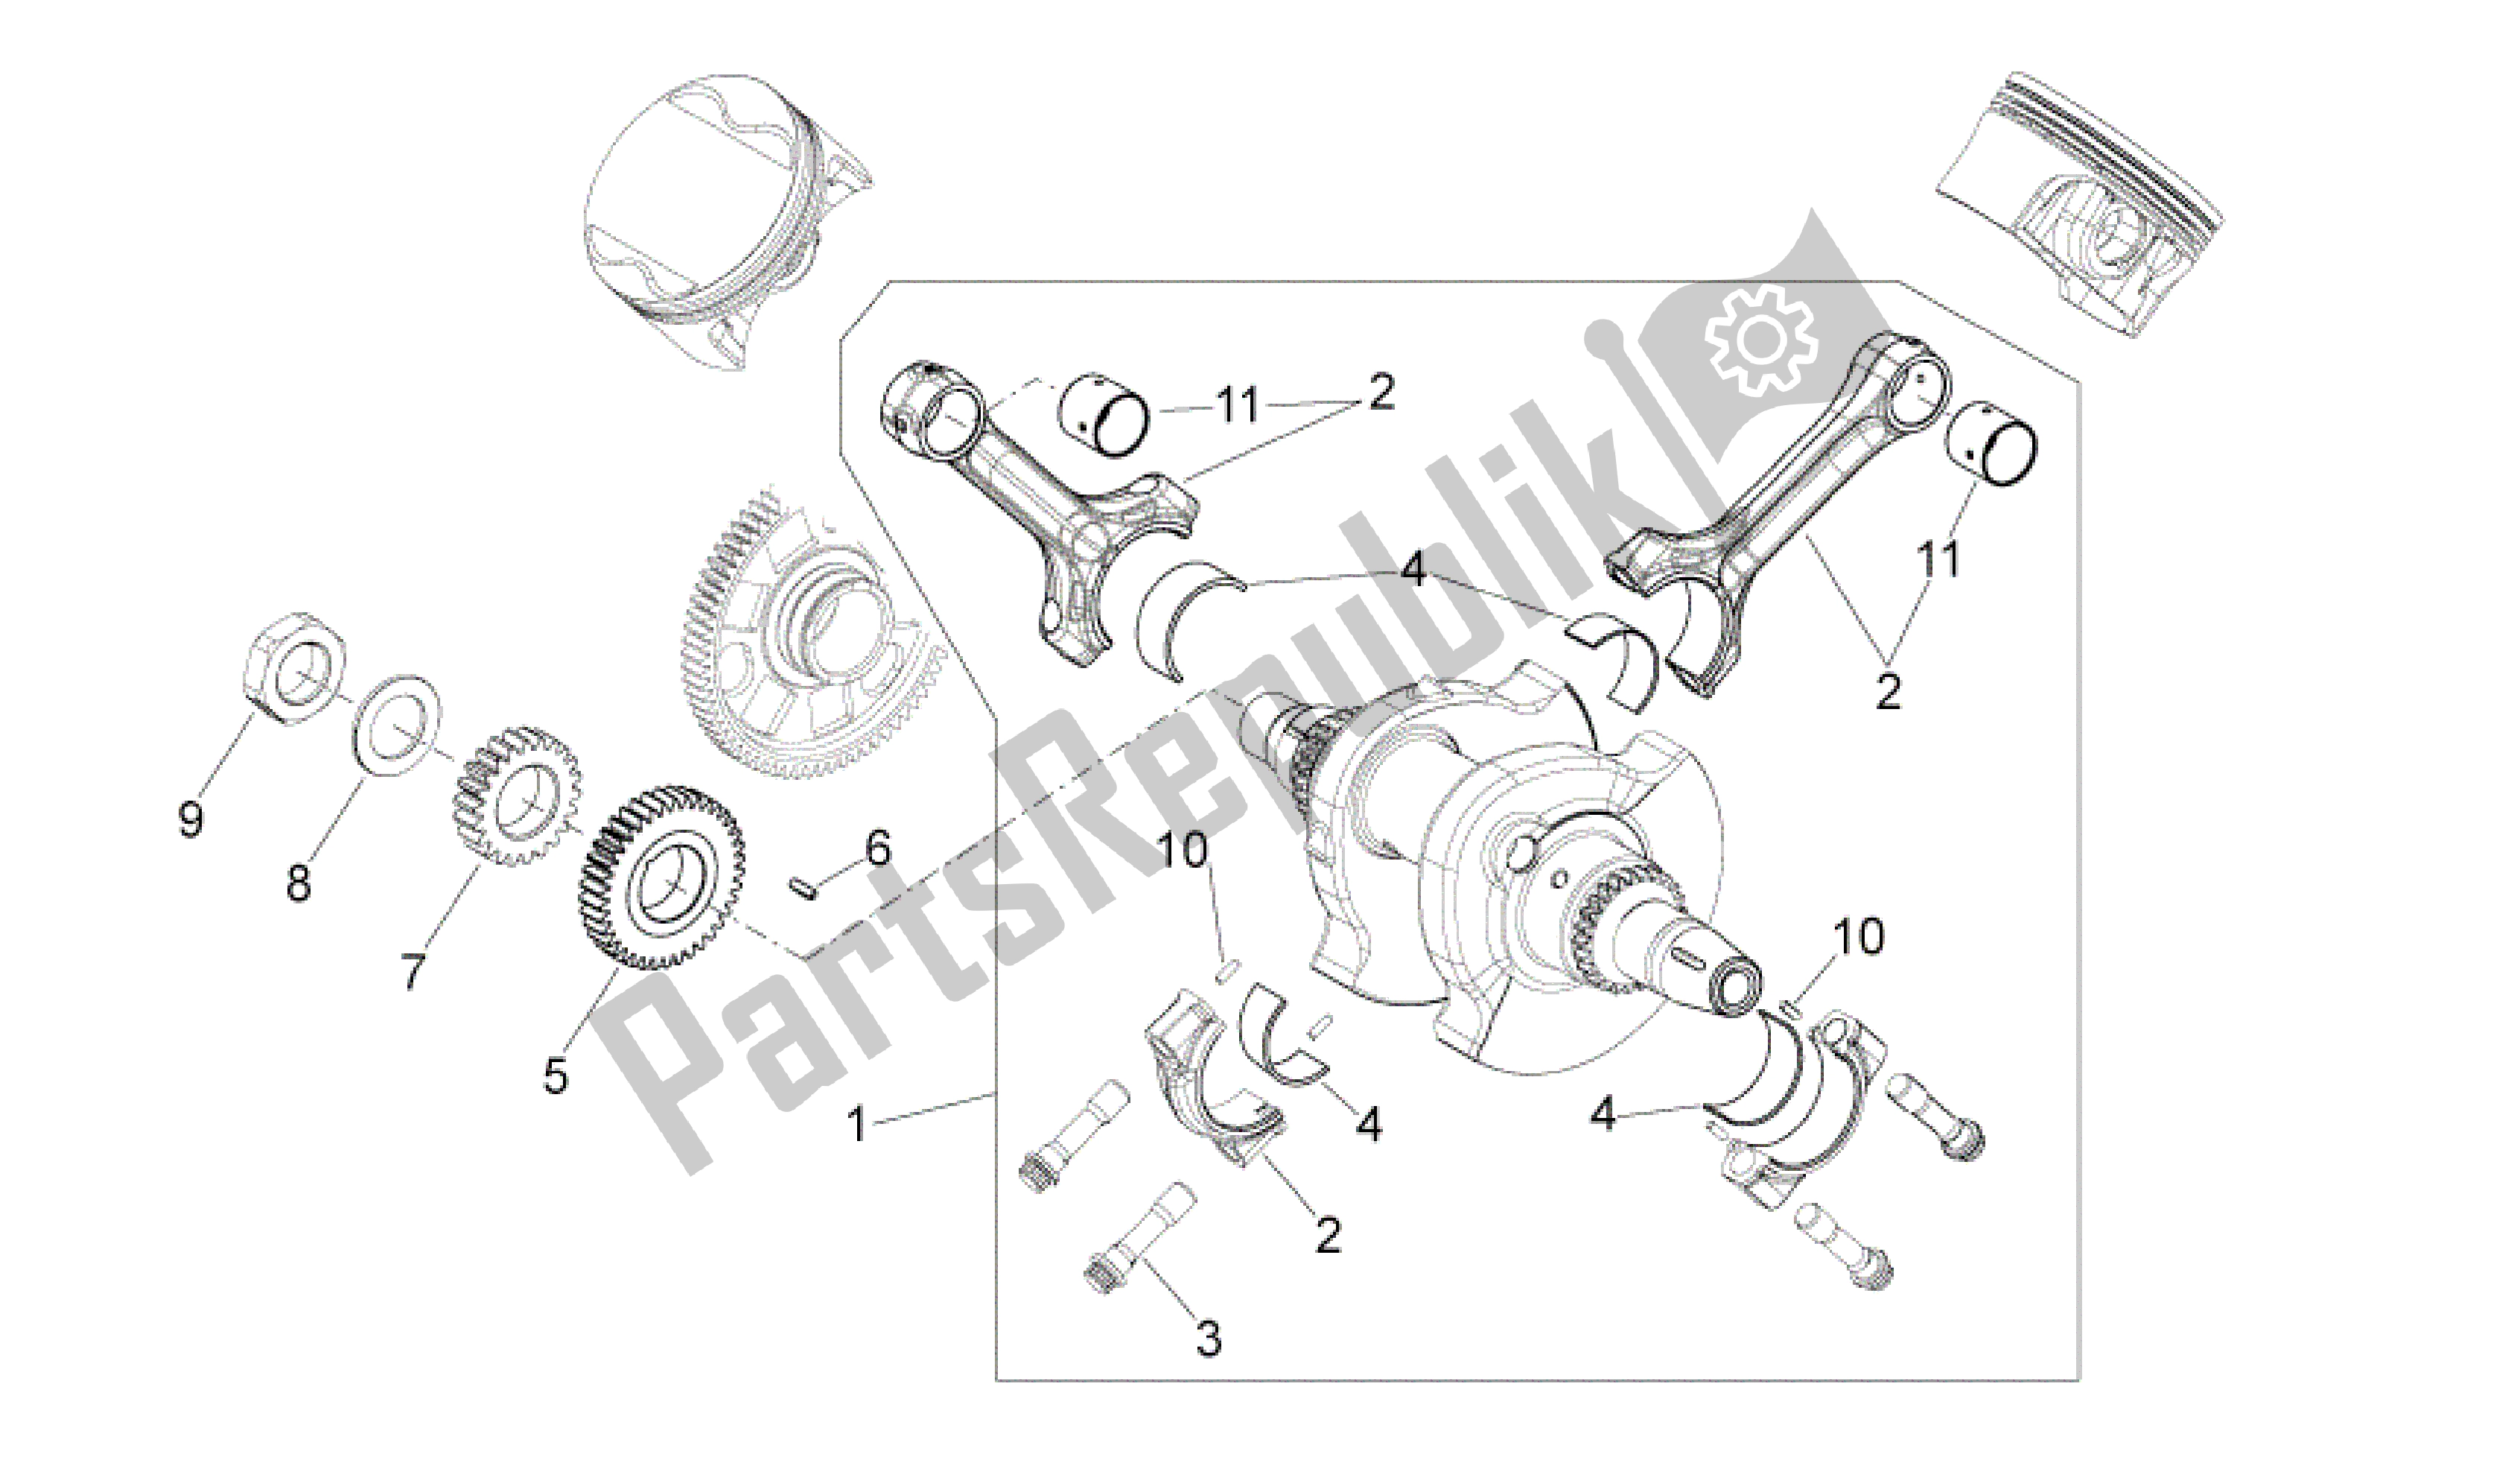 All parts for the Drive Shaft of the Aprilia Shiver 750 2011 - 2013